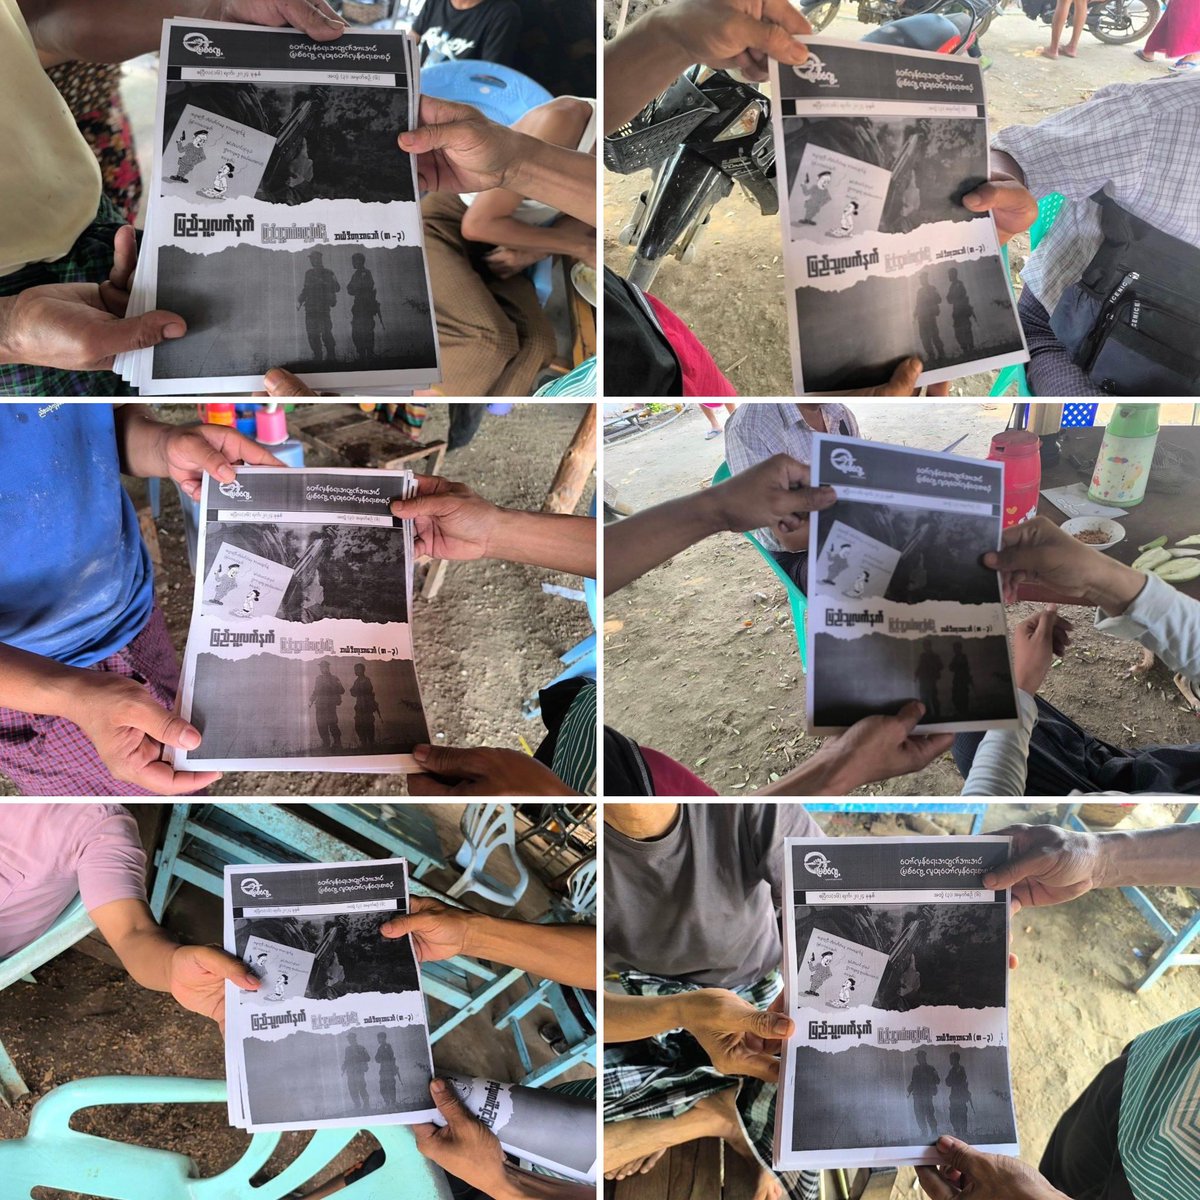 The comrades of Lu Nge Arr Man Strike distributed the Myit Gwe revolutionary fliers to the residents in some of the villages of western #Yinmarbin Twp and northern #Pale Twp on Apr21.

#AgainstConscriptionLaw   
#2024Apr21Coup  
#WhatsHappeningInMyanmar